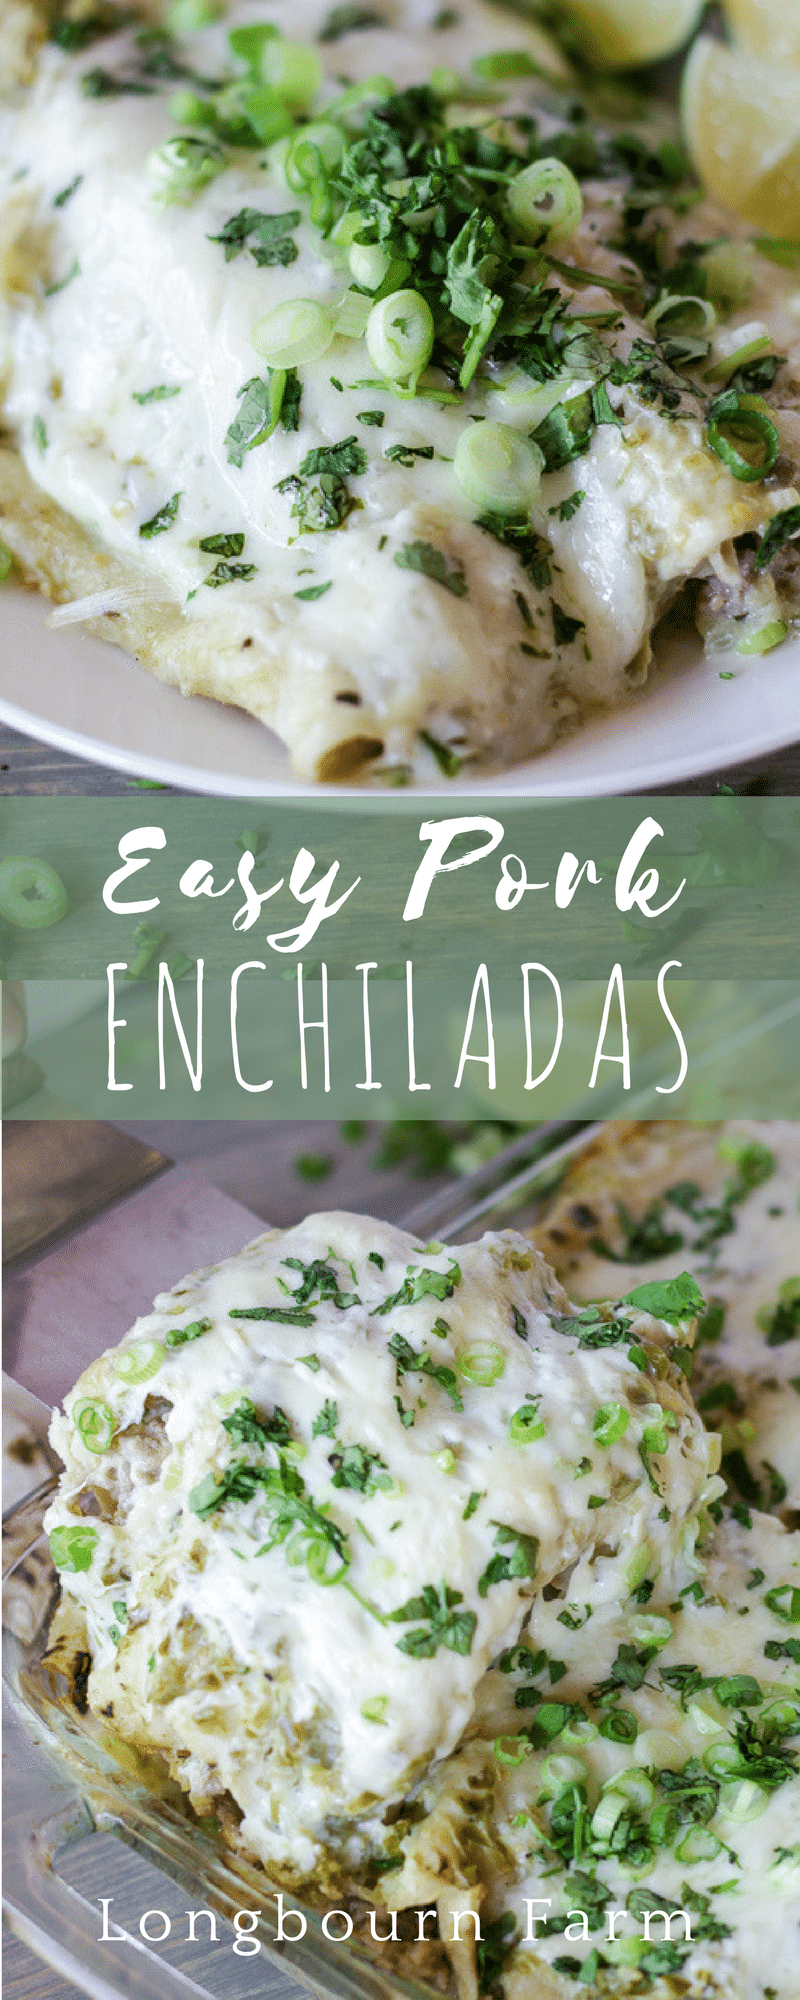 These easy pork enchiladas are quick to put together, packed with flavor and will be a hit with the whole family!